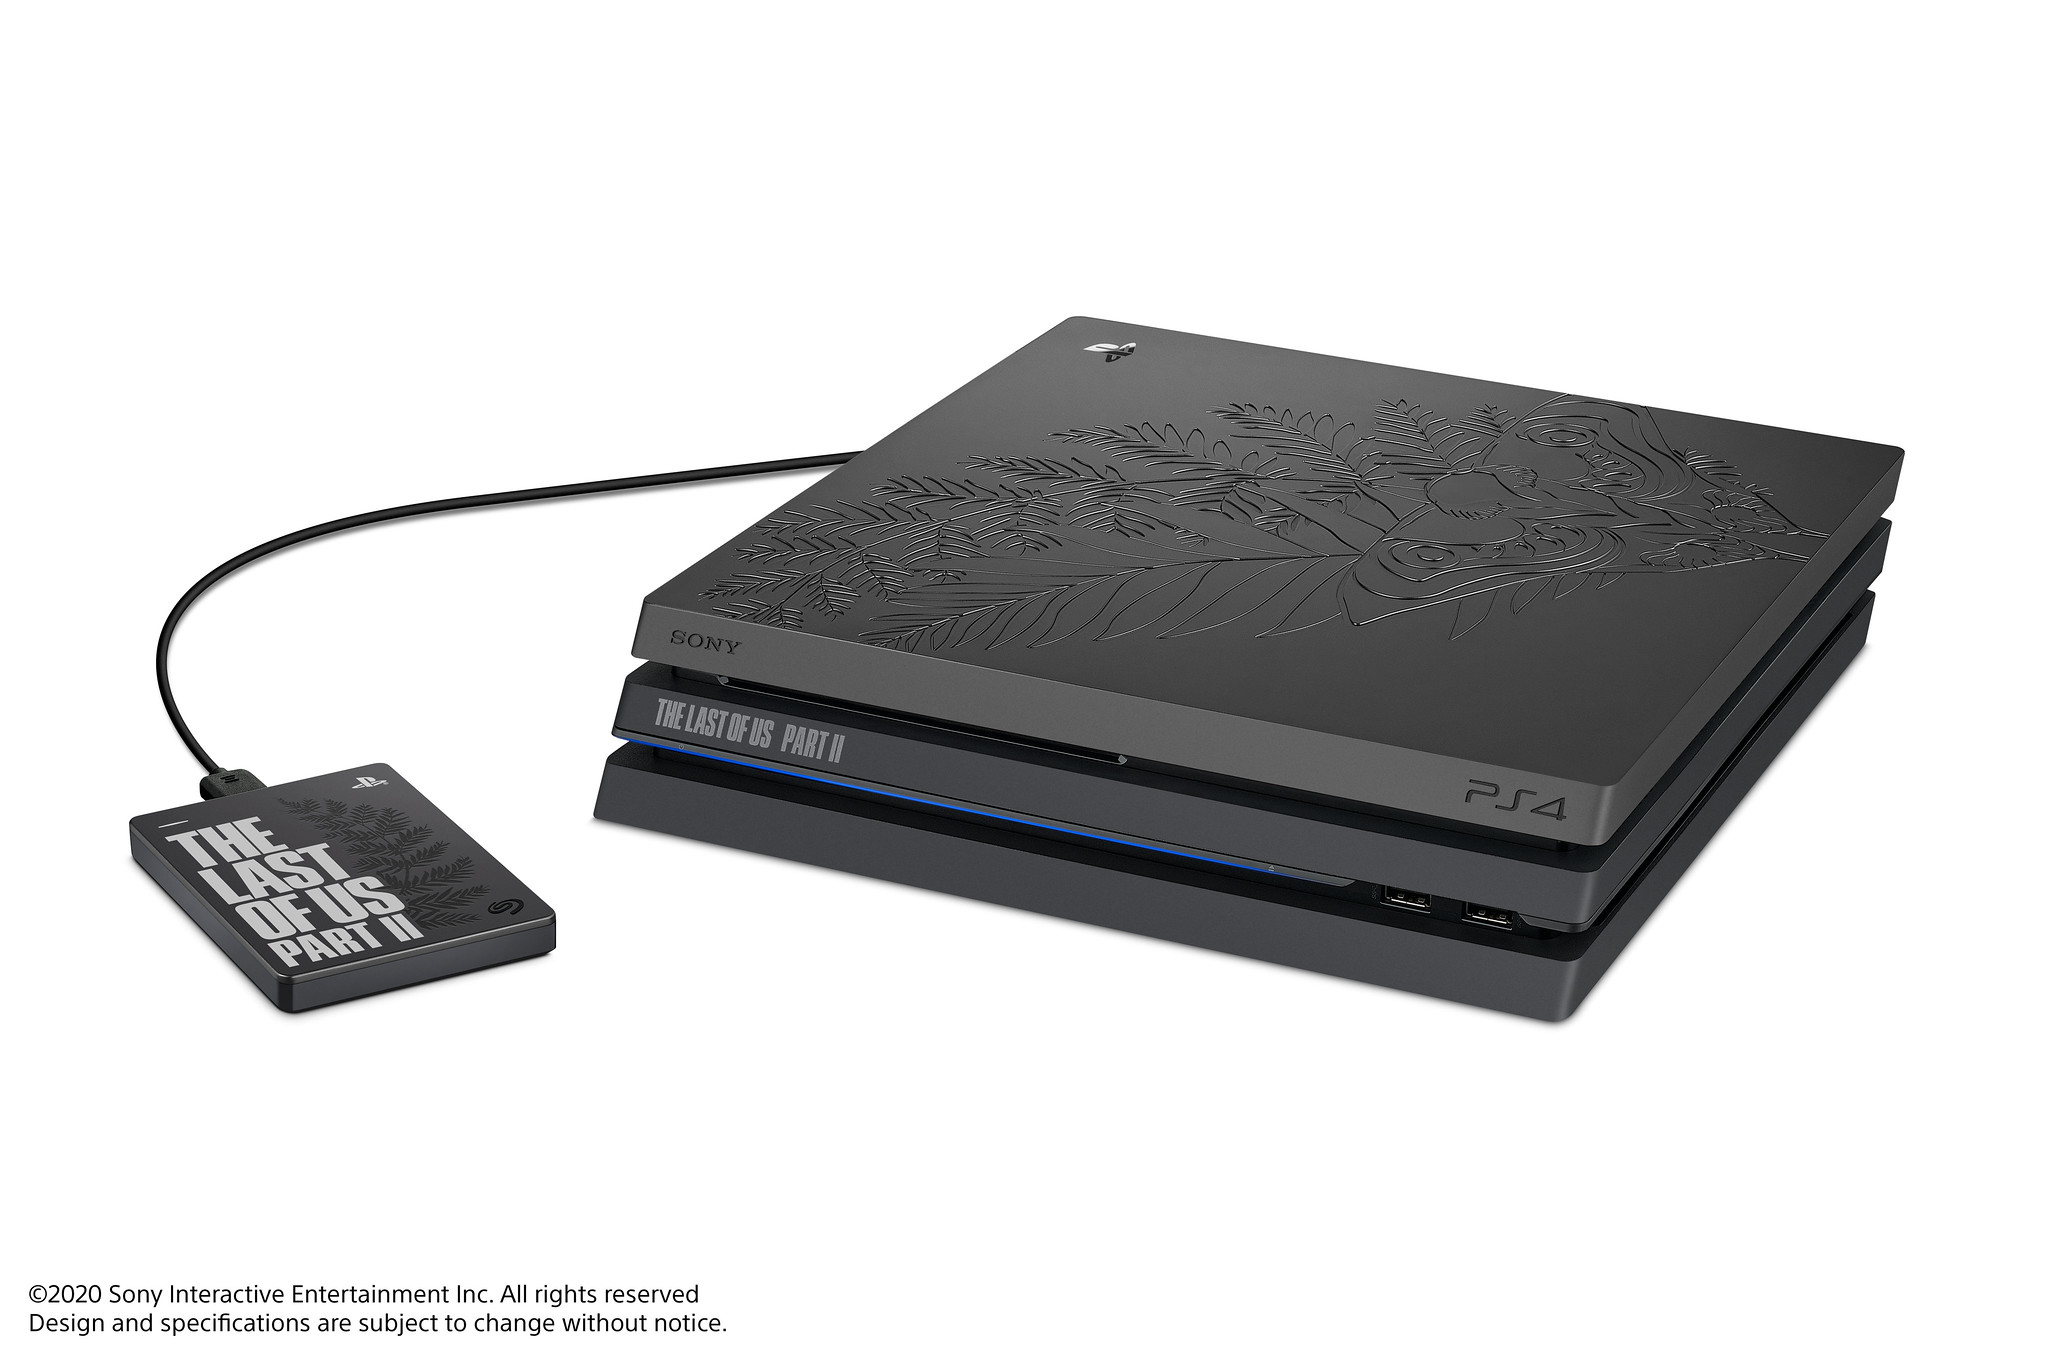 The Last of Us Part II gets limited edition PS4, Game Drive, controller and  headset